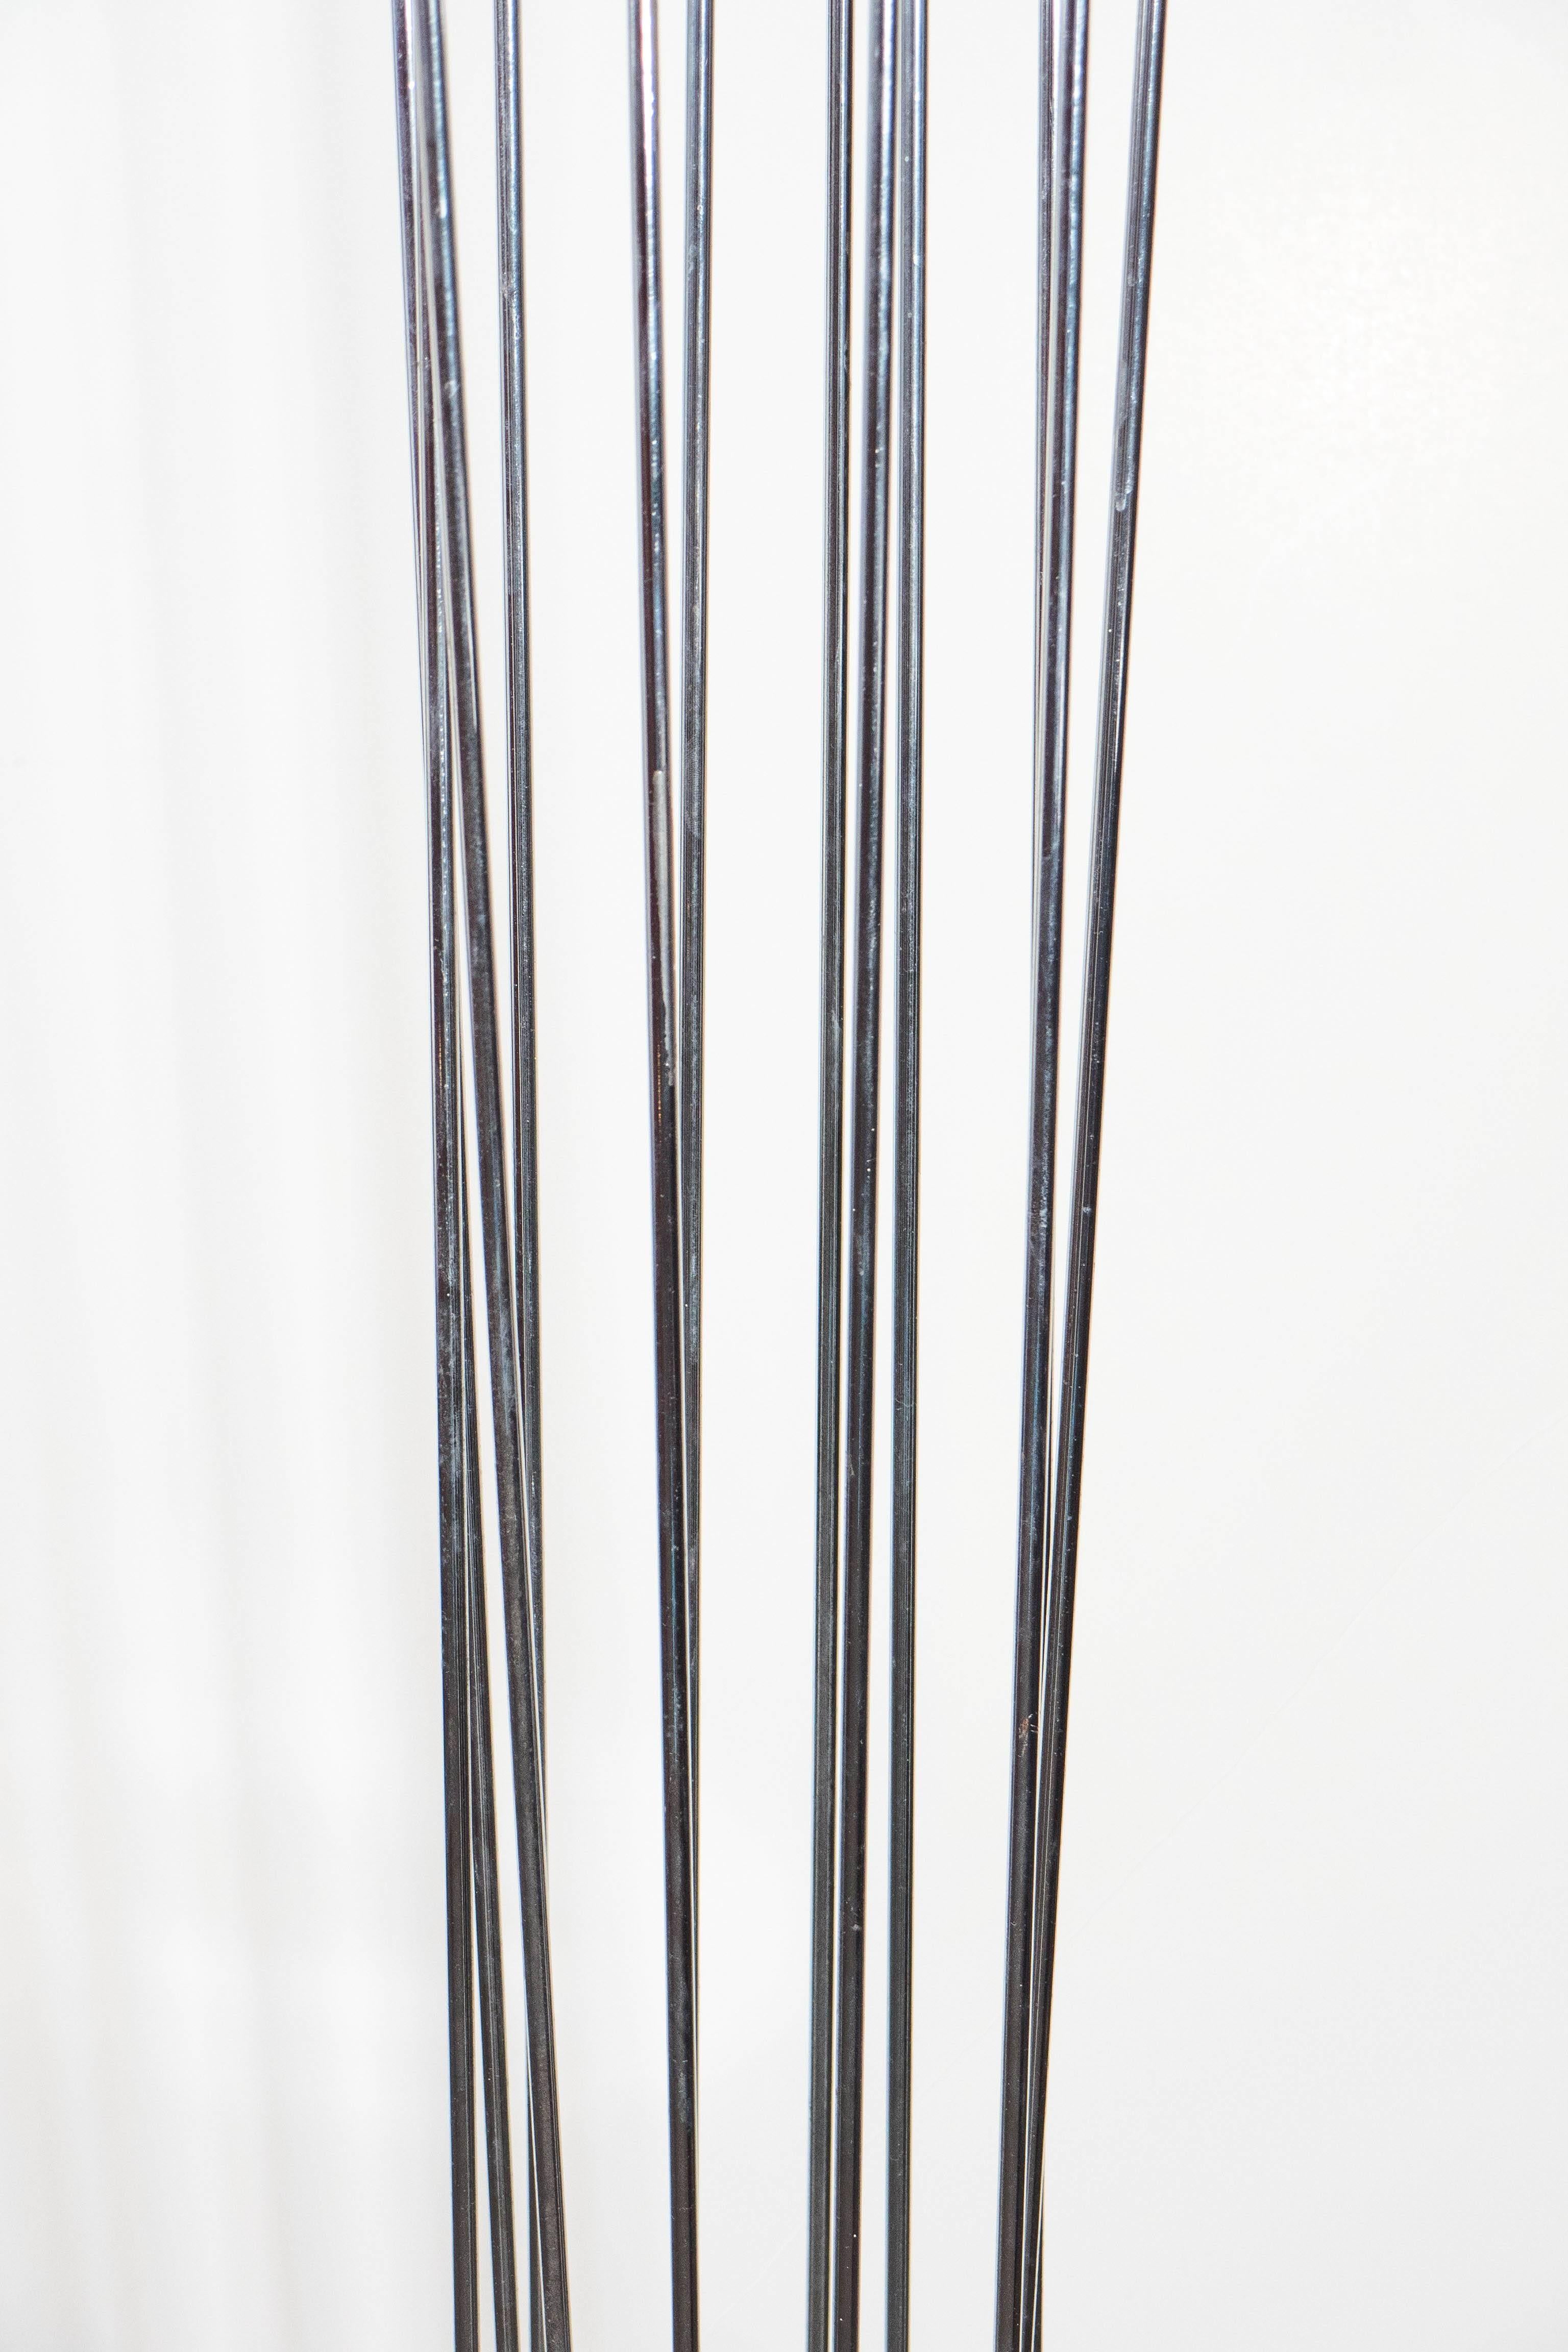 Curtis Jere Illuminated Kinetic Floor Lamp in Chrome and Brass In Good Condition In New York, NY